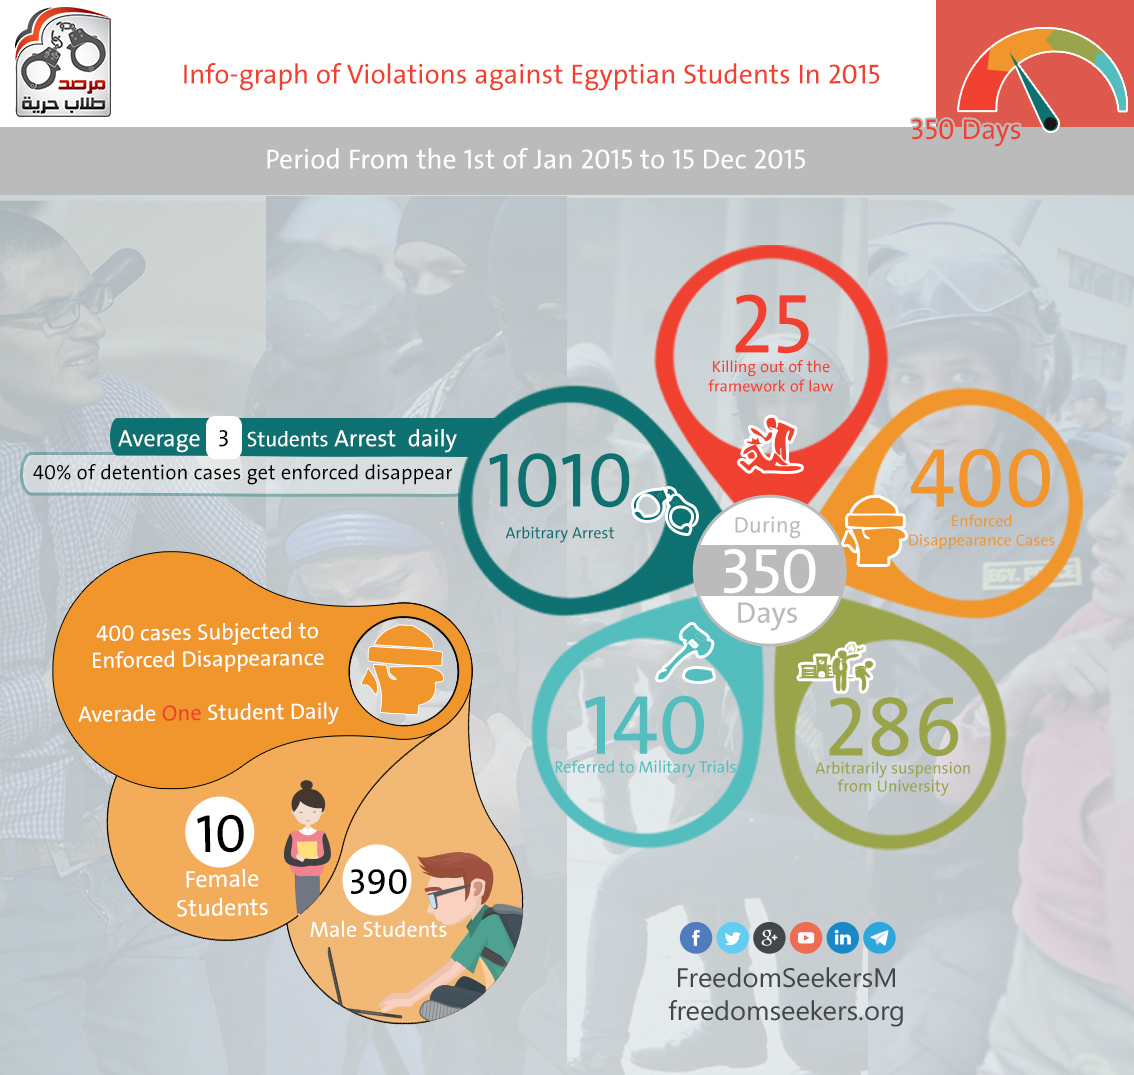 Info-graph of Violations against Egyptian Students In 2015